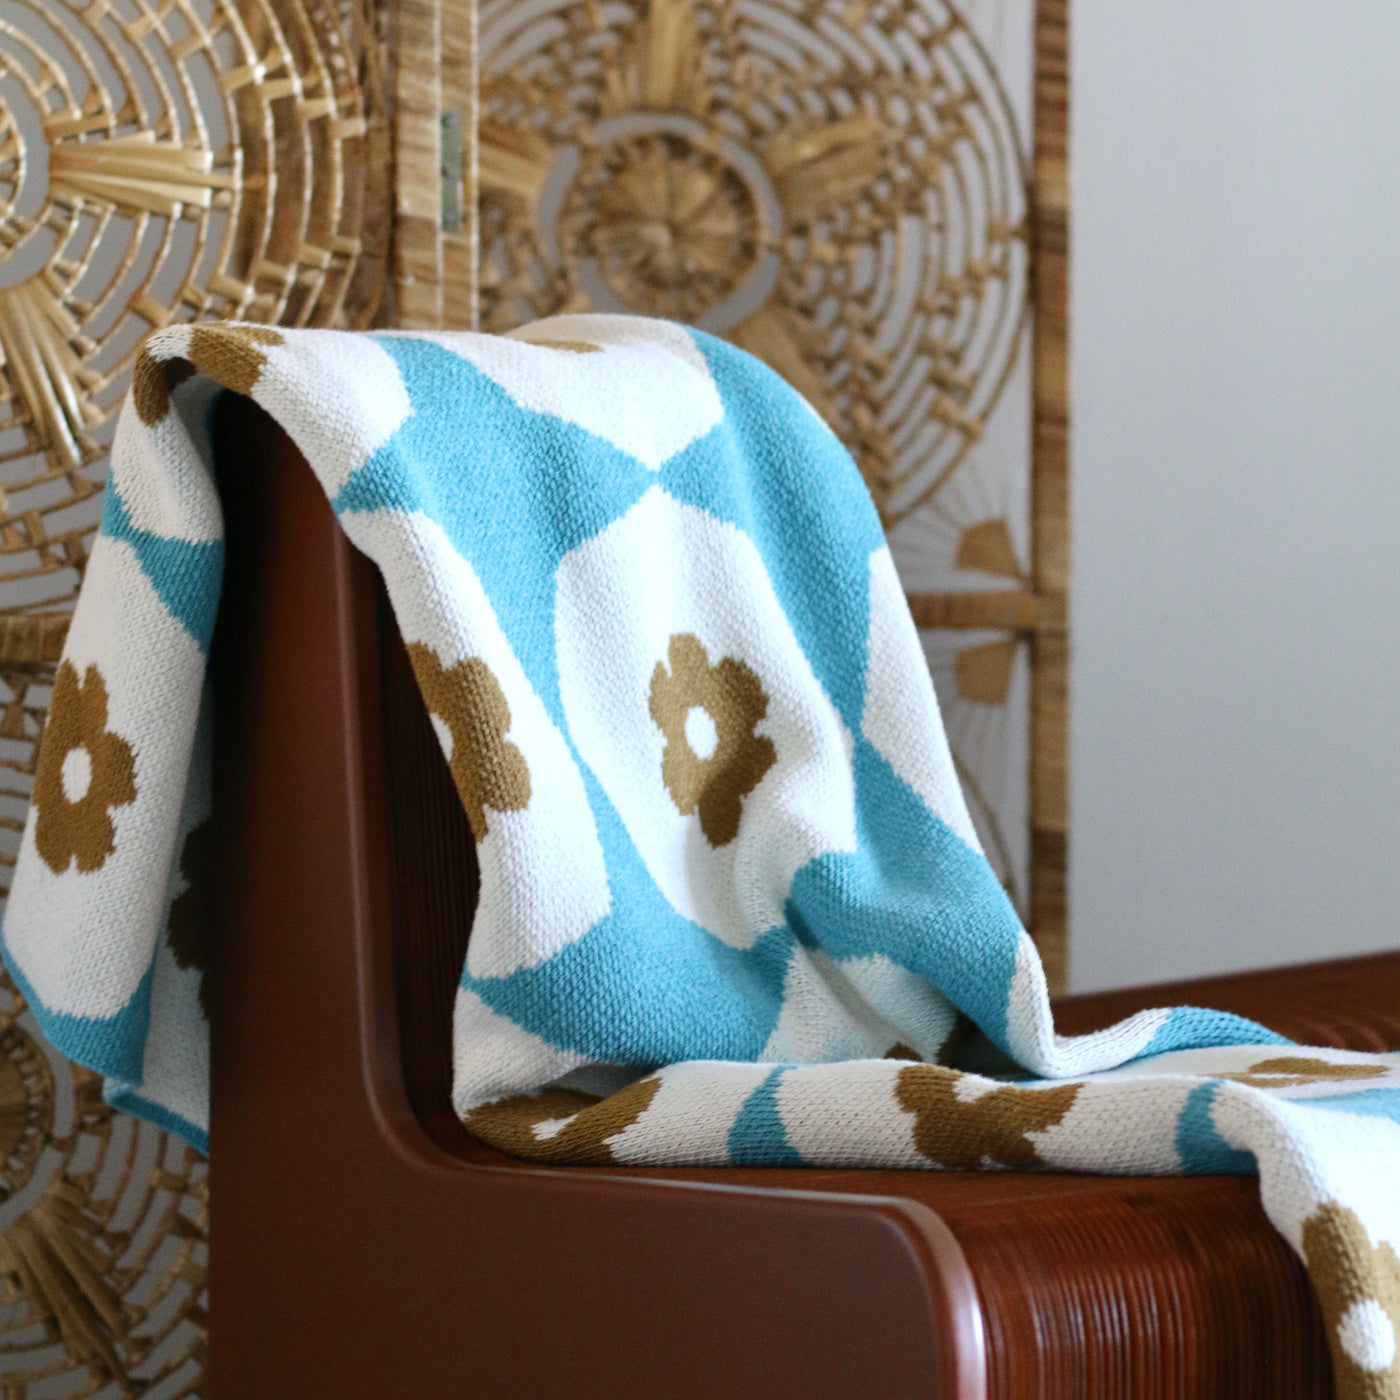 Turquoise and Gold Flower Tile Pattern Throw on Rattan Chair